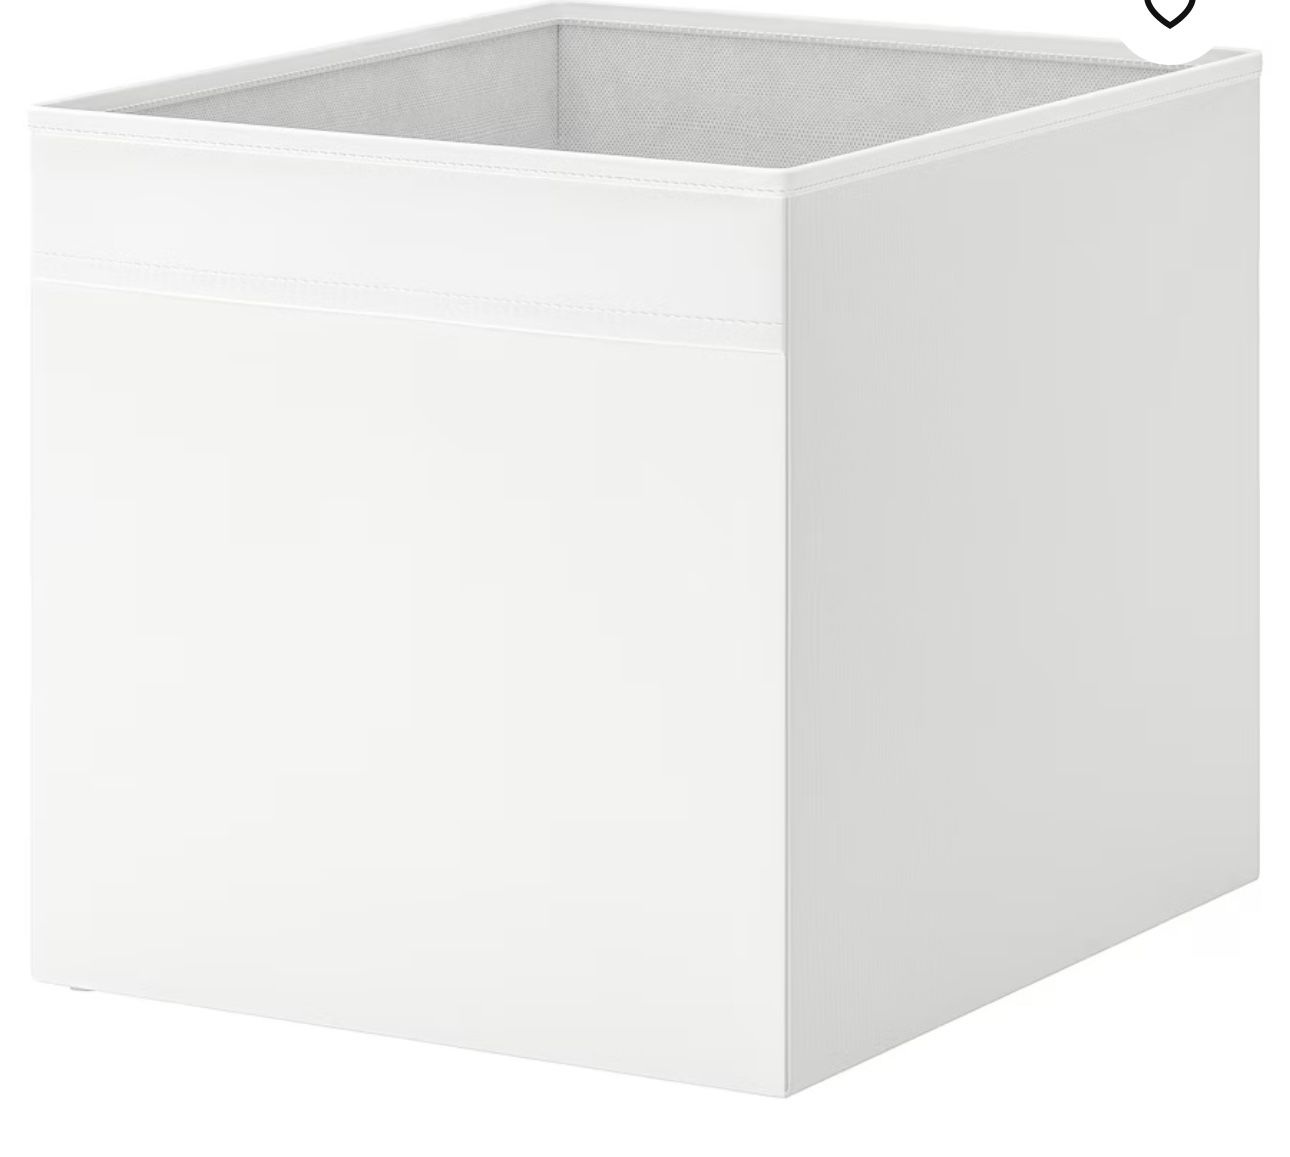 Ikea Cube Insert Bin. Collapsible Fabric Containers- White